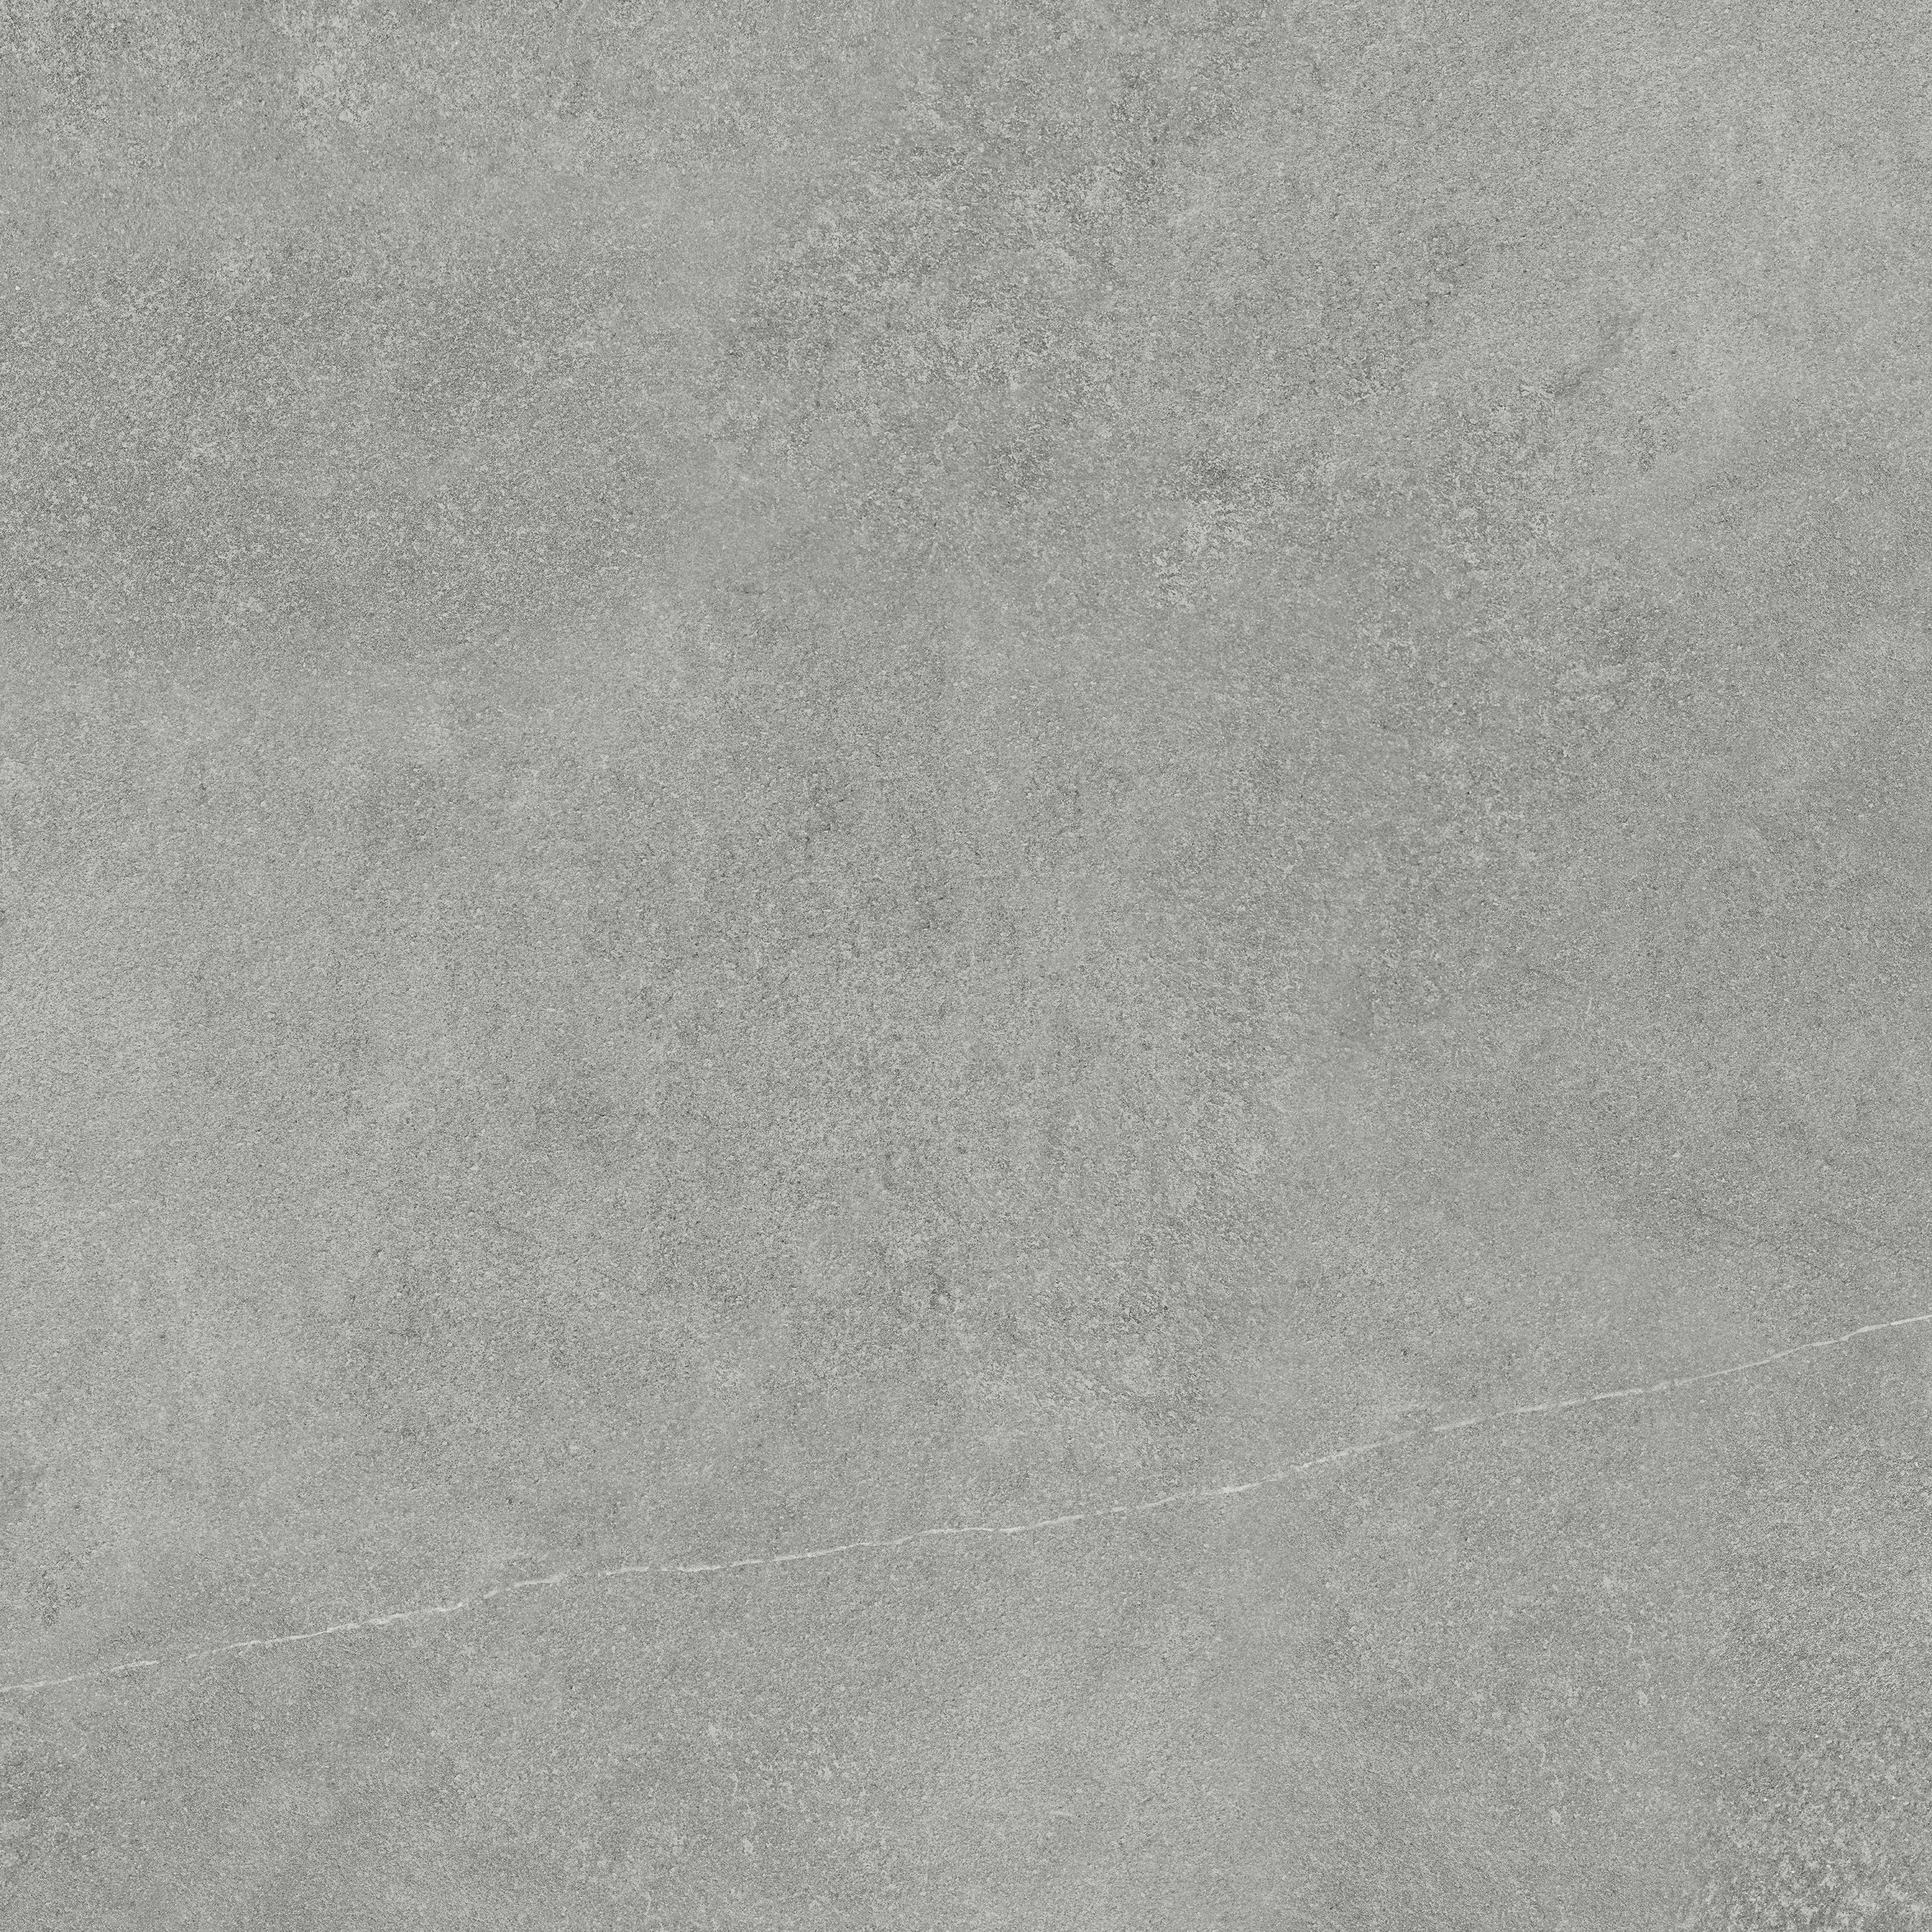 mica pattern color body porcelain field tile from mjork anatolia collection distributed by surface group international matte finish rectified edge 32x32 square shape